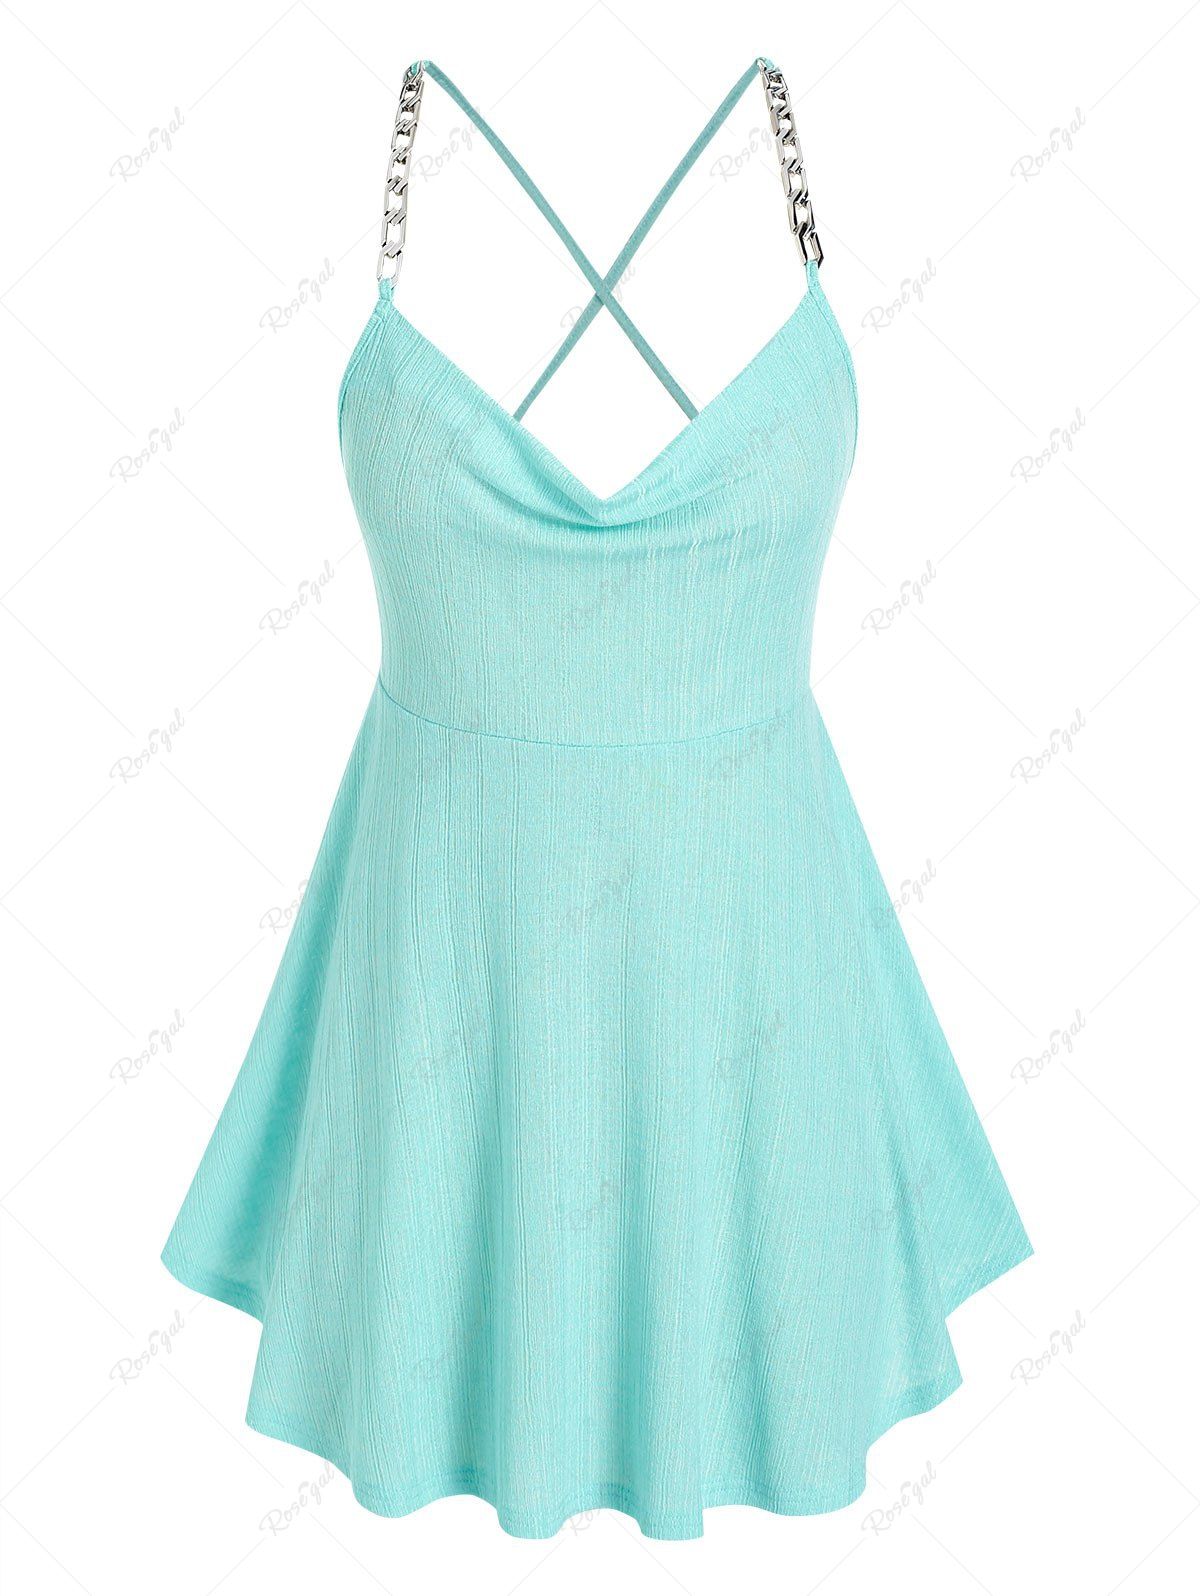 Latest Plus Size & Curve Knitted Chain Strap Criss Cross Backless Tank Top  